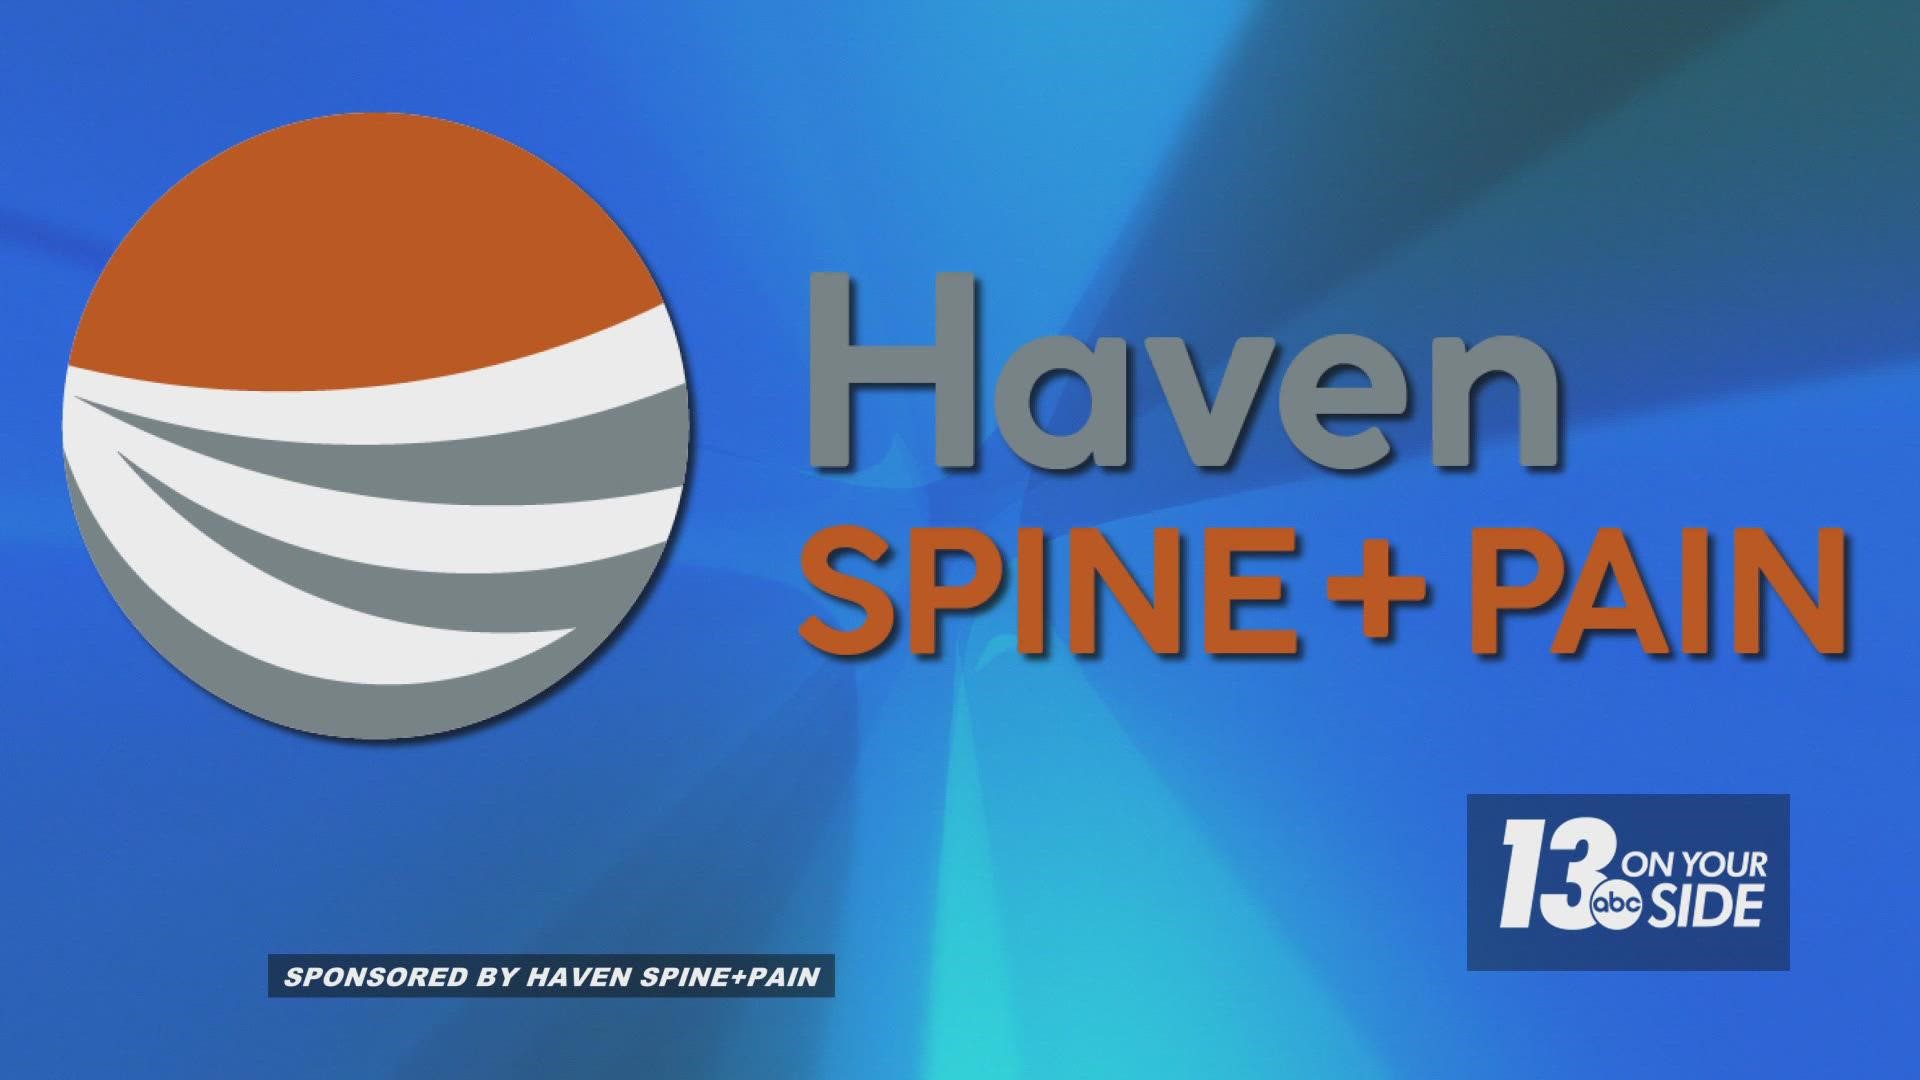 We sat down with Dr. Marc Korn, Associate Medical Director at Haven Spine+Pain, and his colleague, Dr. Zachary Nowak, to talk about what Haven has to offer.